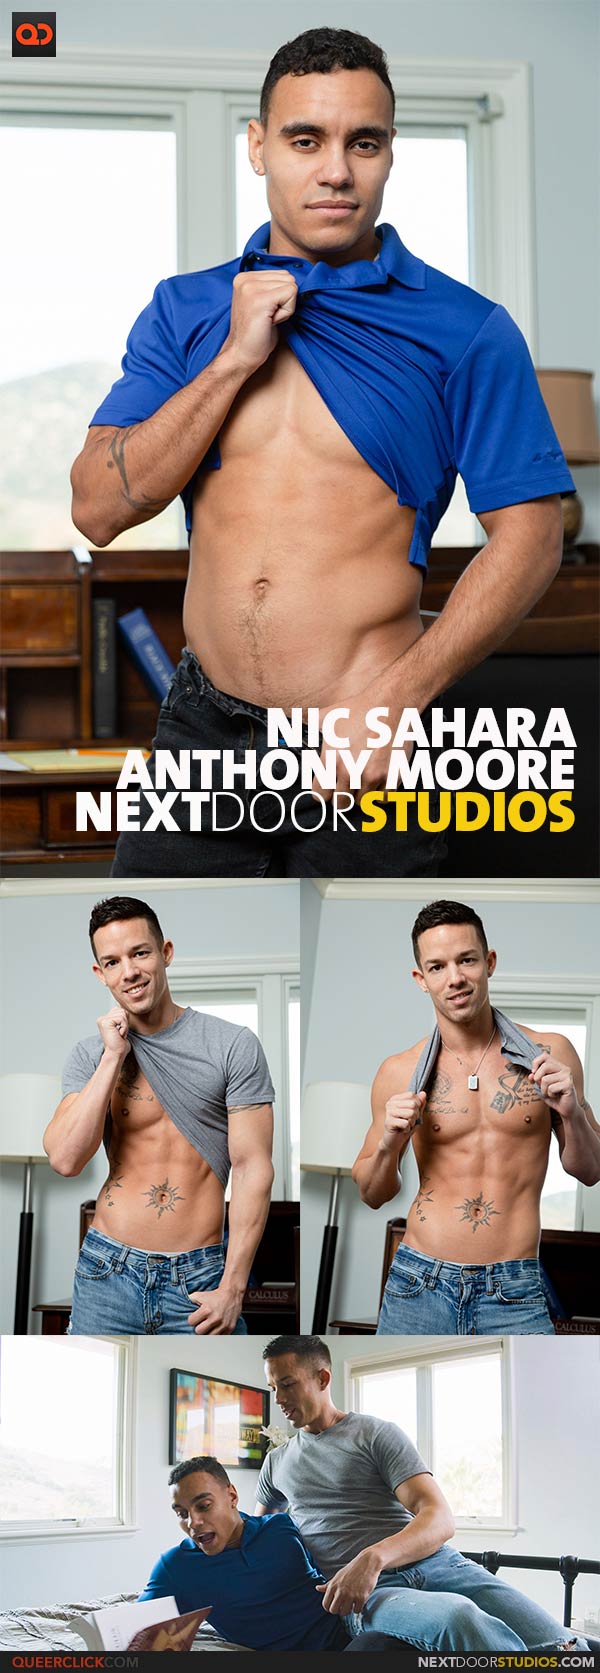 ashlyn dykes recommends anthony moore xxx pic